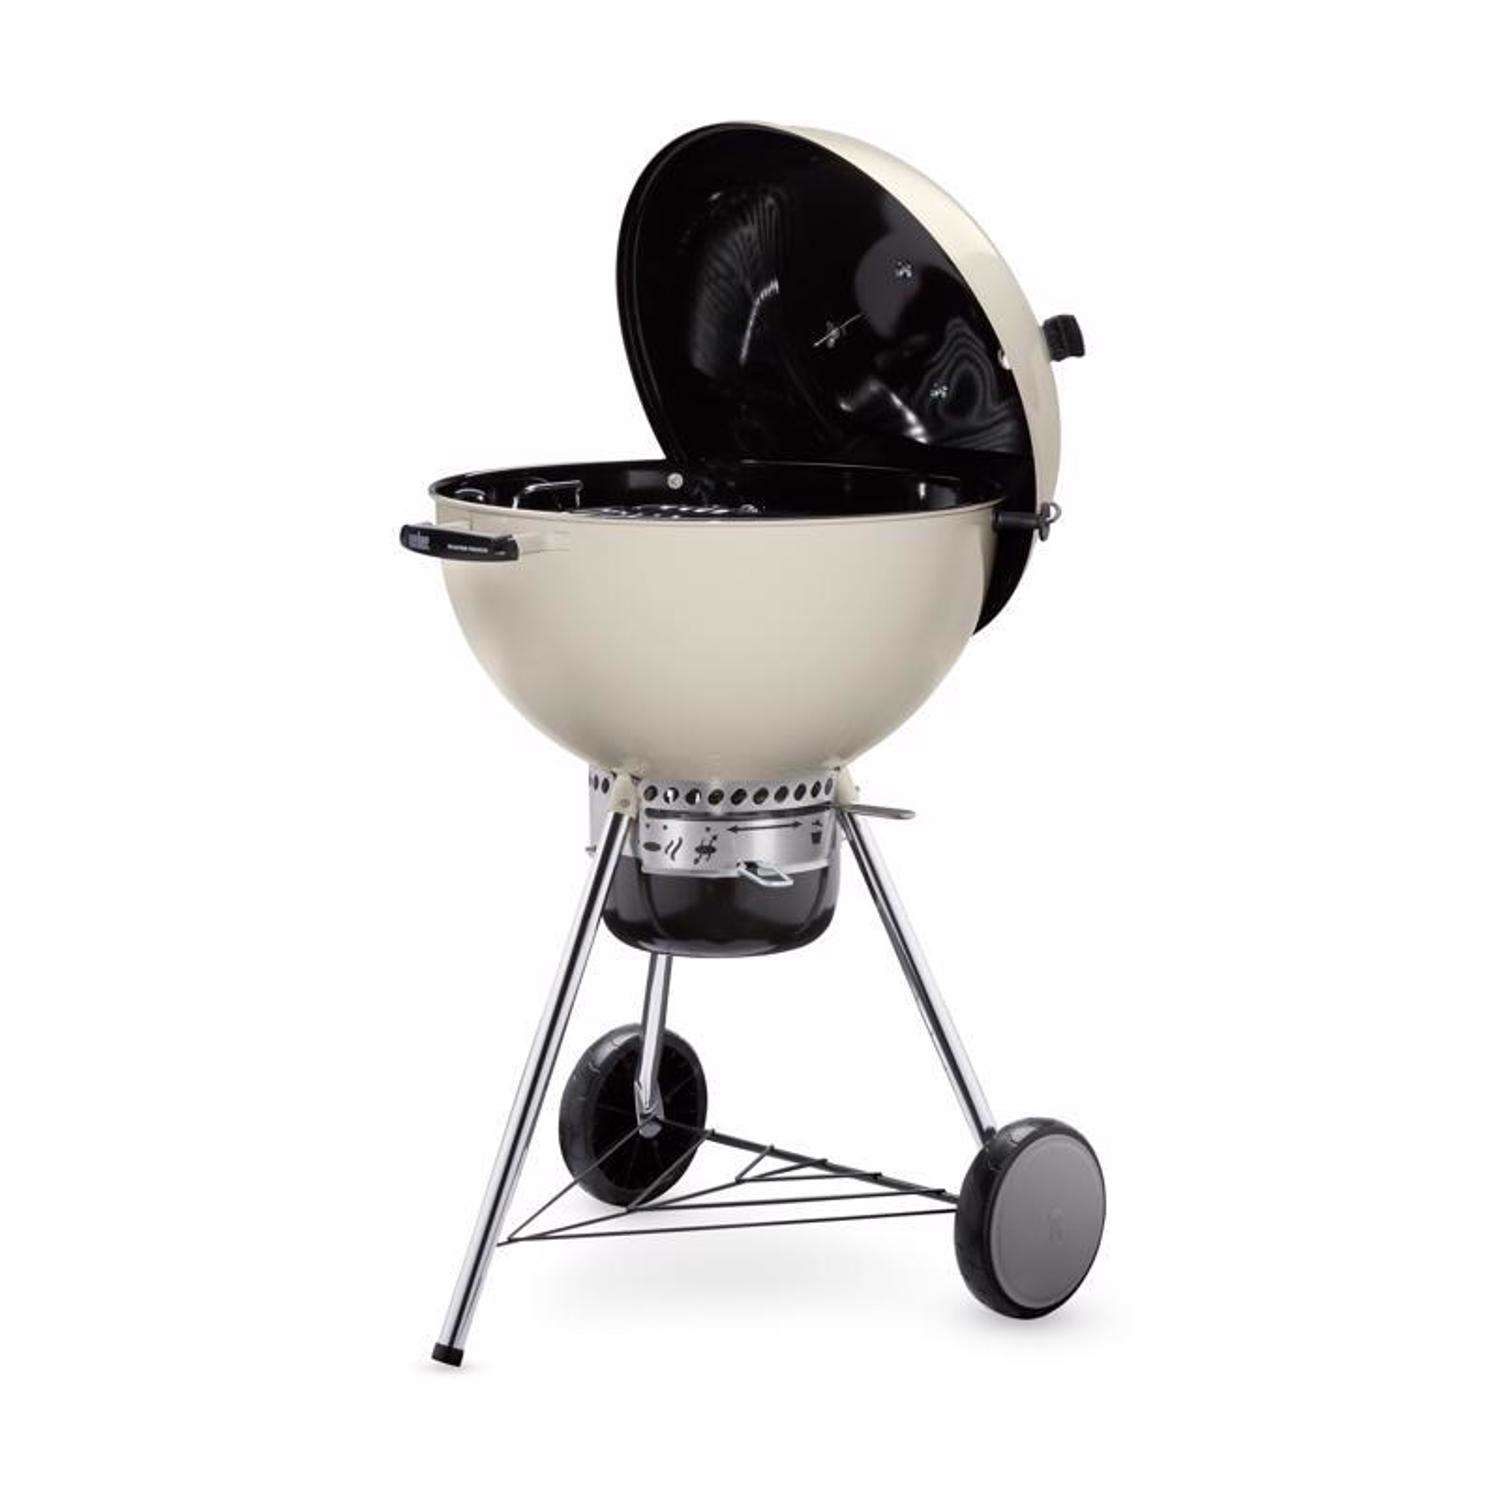 What to cook on an electric grill – AENO Blog